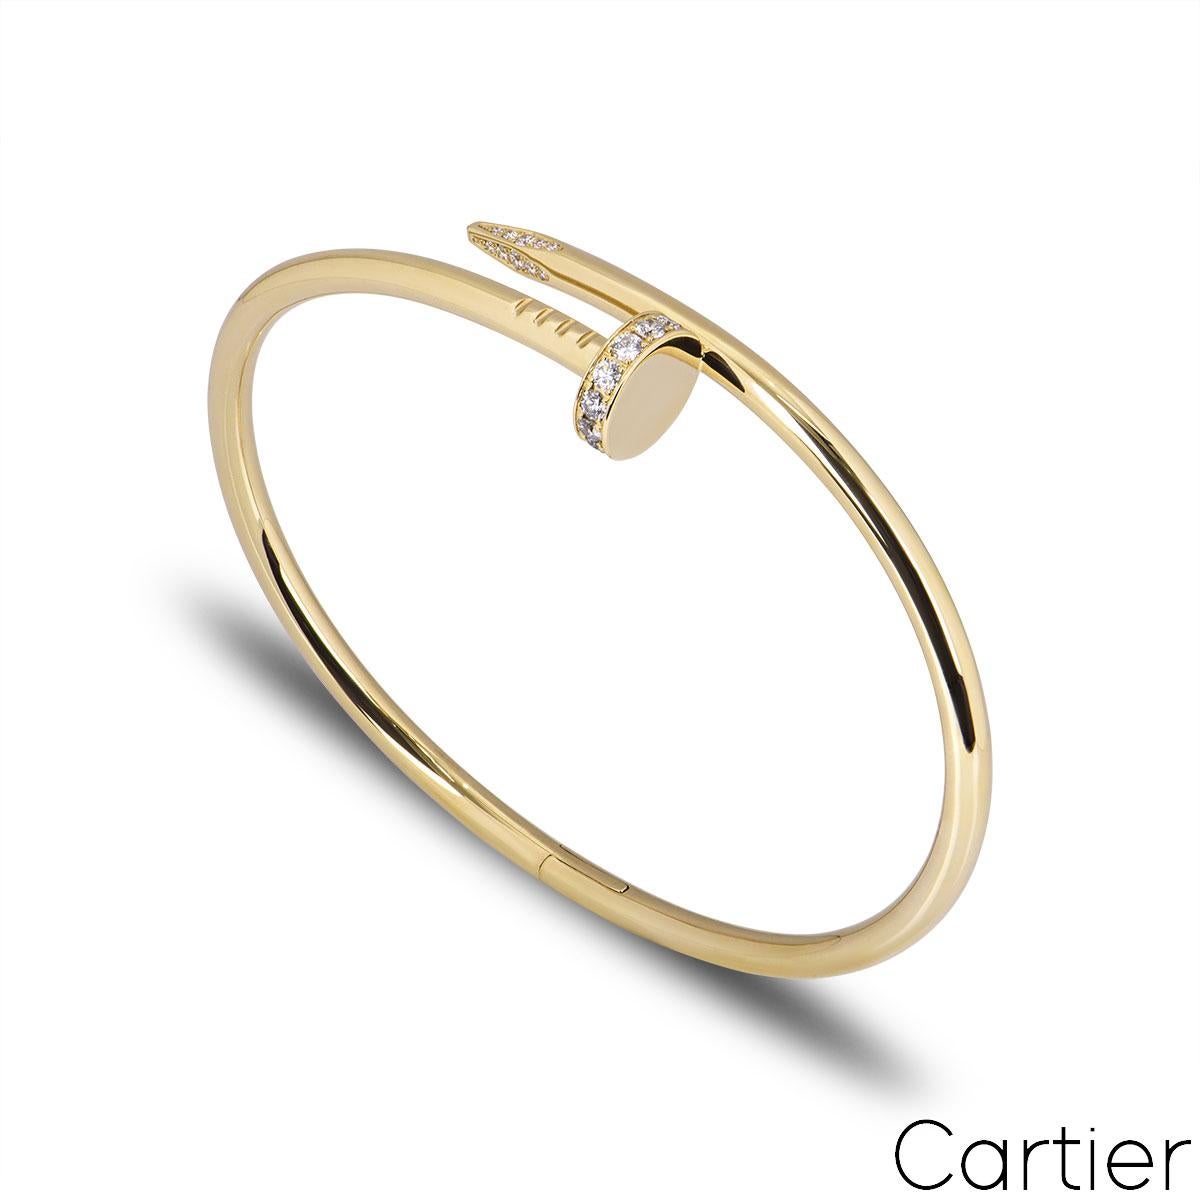 Cartier Yellow Gold Diamond Juste Un Clou Bracelet Size 20 B6048620 In Excellent Condition For Sale In London, GB